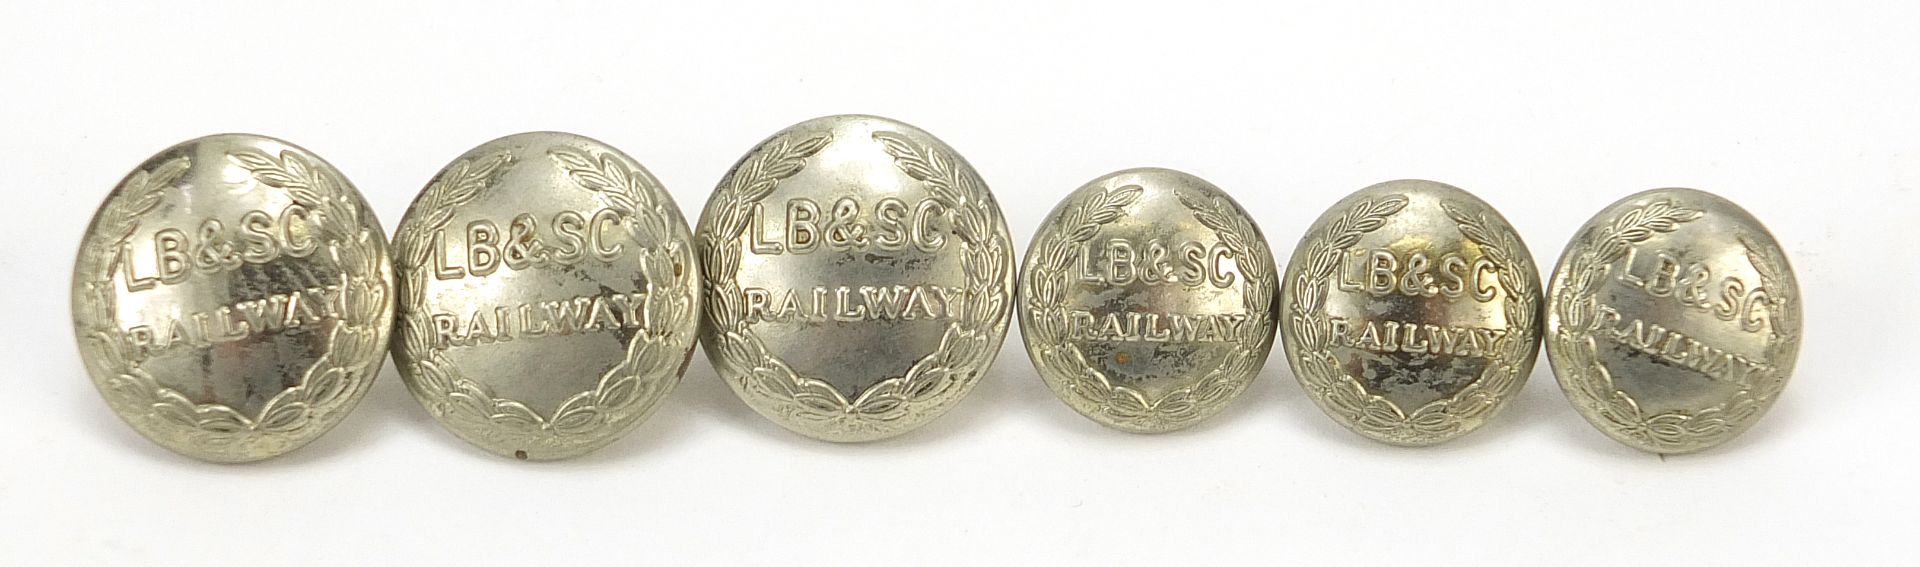 Six London Brighton And South Coast Railway buttons